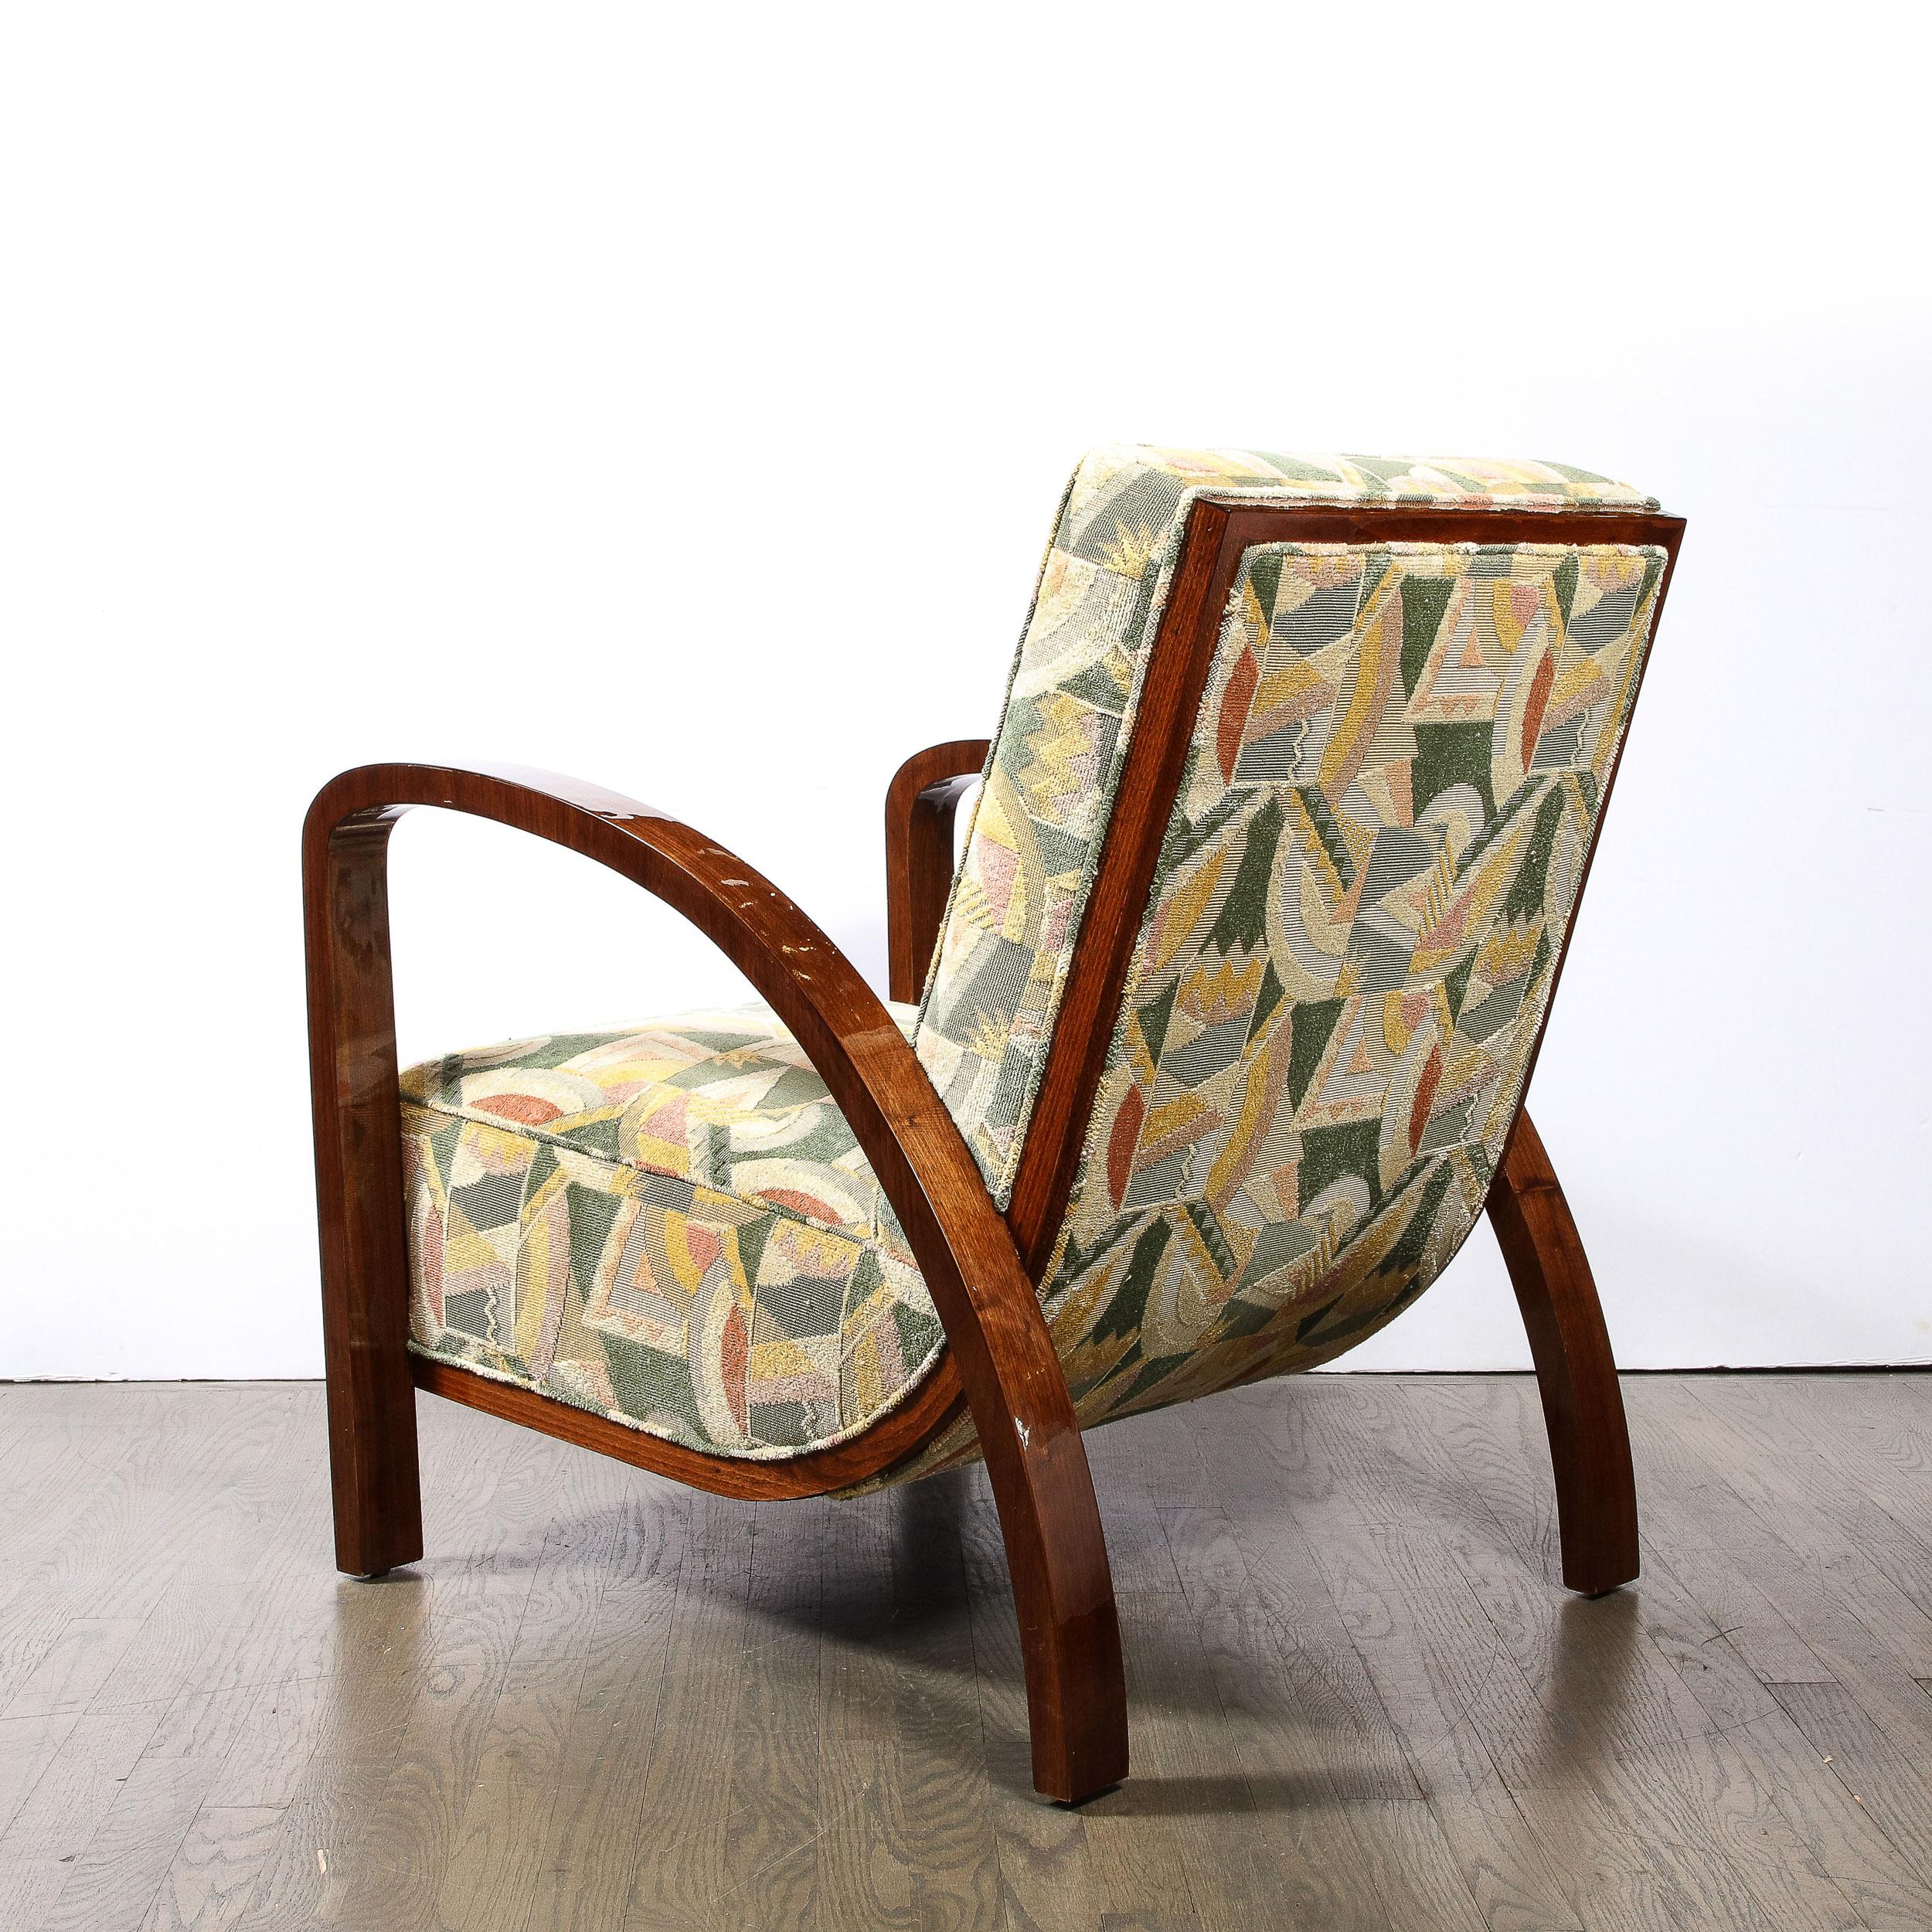 Pair of Art Deco Halabala Arm Chairs in Walnut & Rare Clarence House Fabric For Sale 2